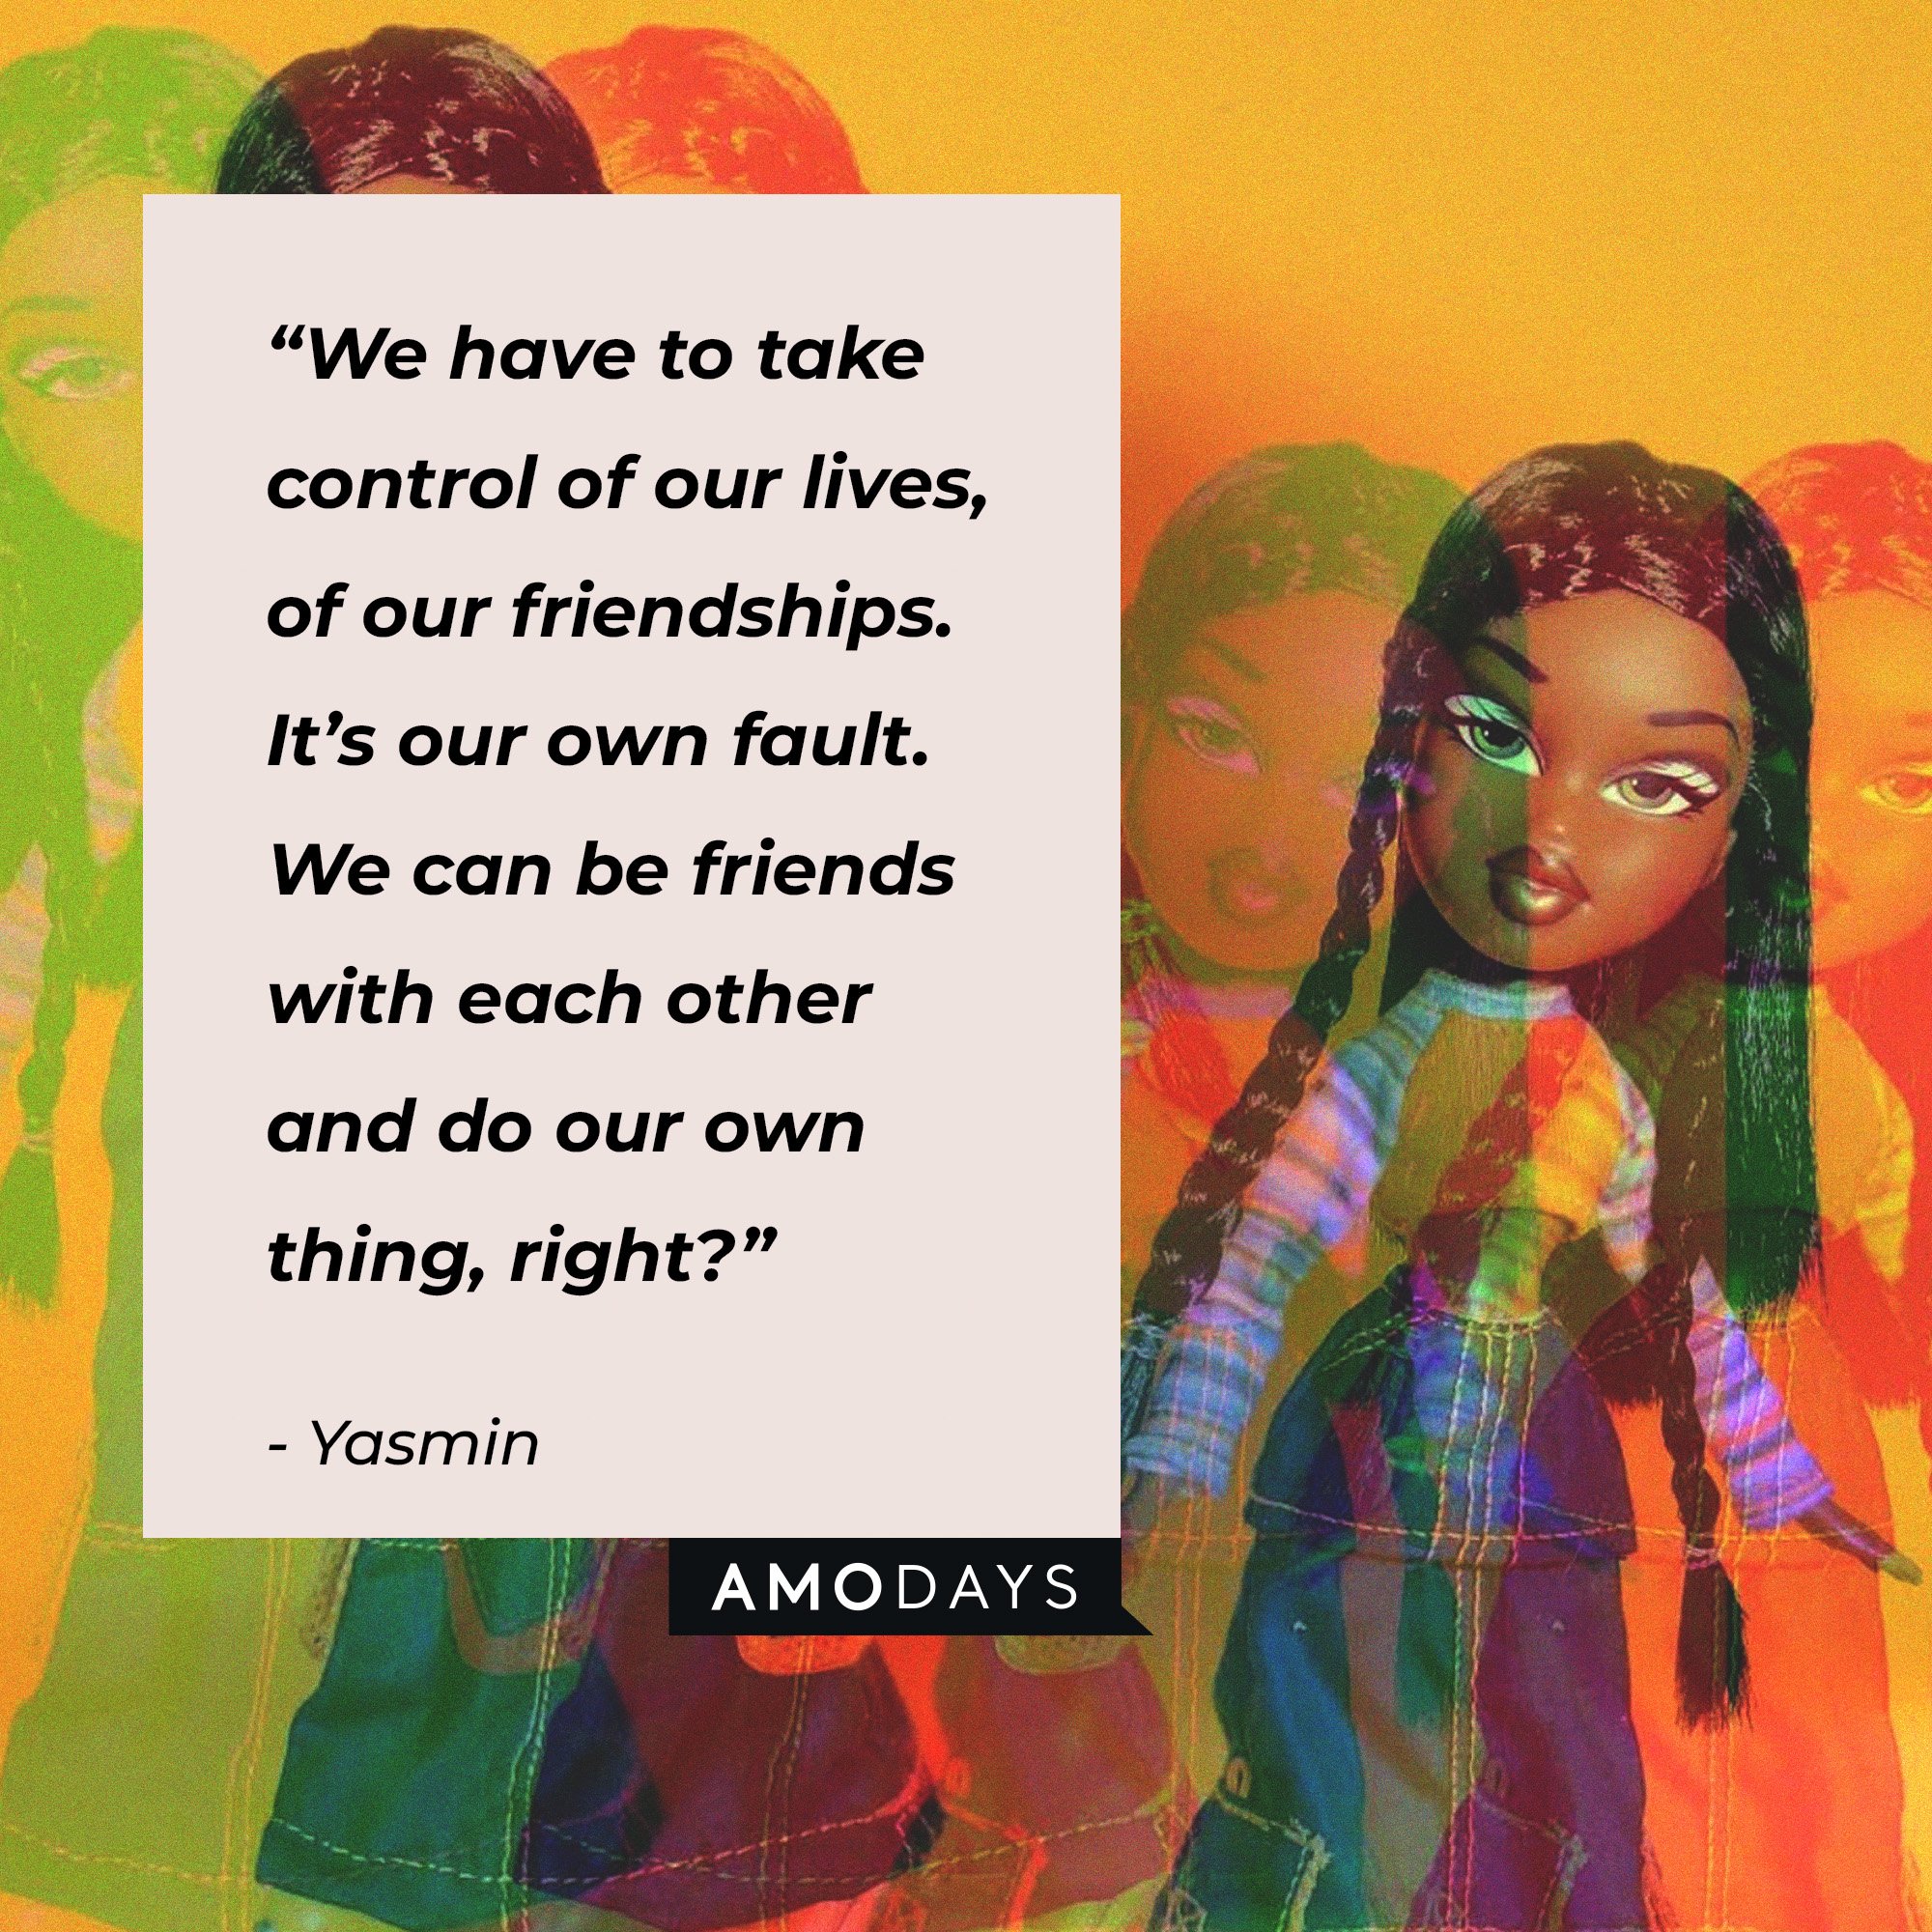 Yasmin's quote: “We have to take control of our lives, of our friendships. It’s our own fault. We can be friends with each other and do our own thing, right?” | Image: AmoDays